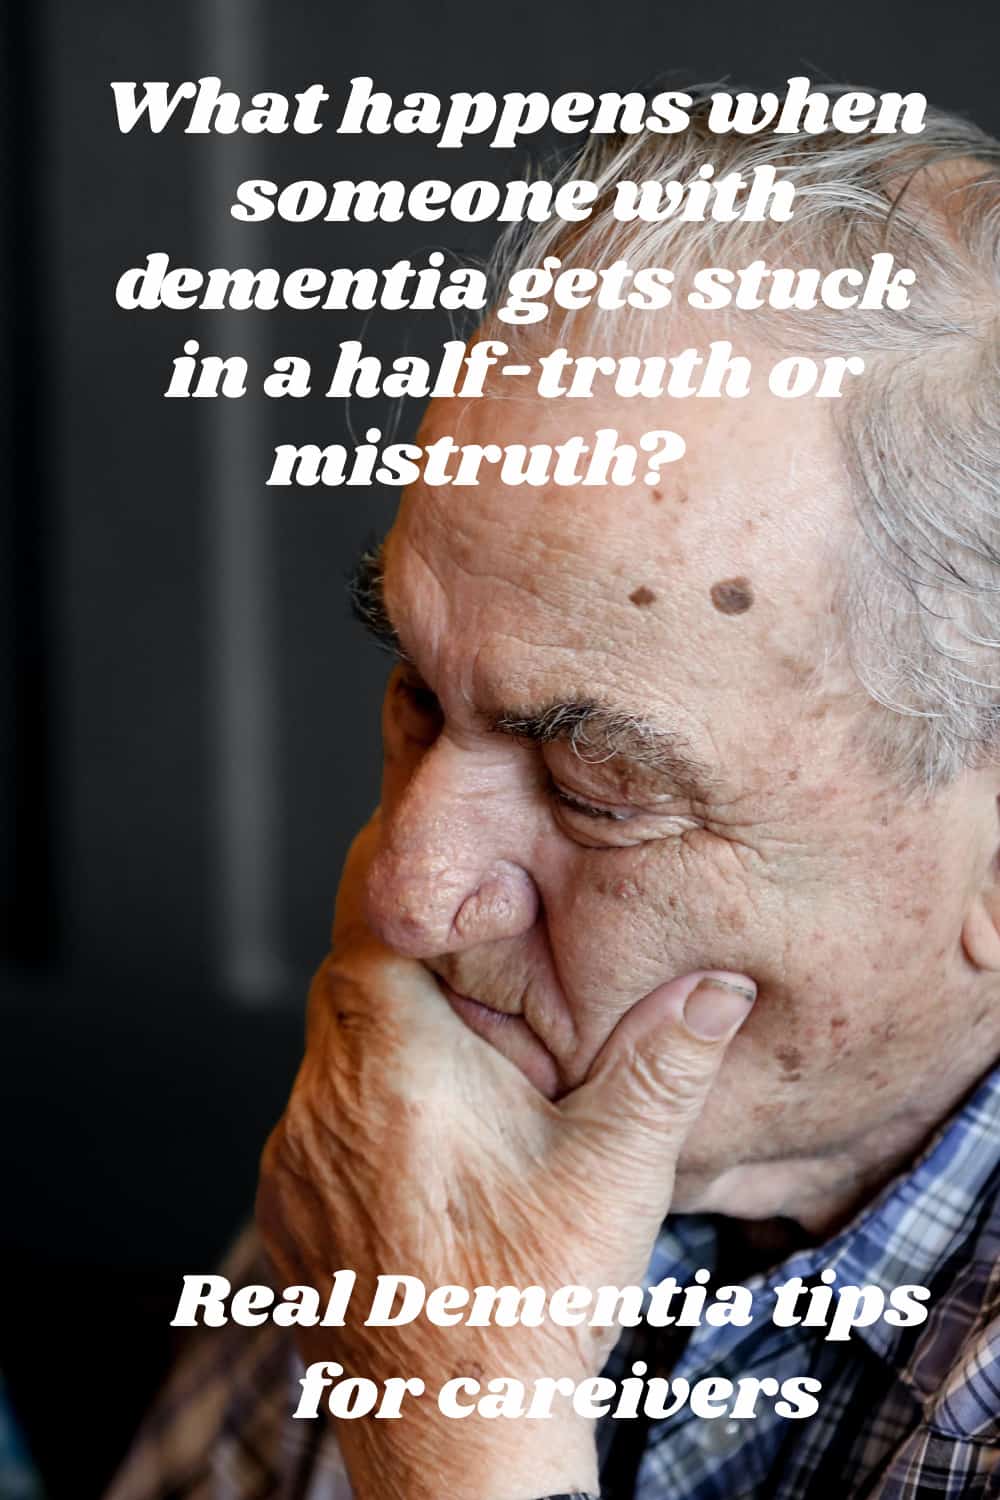 What happens when someone with dementia gets stuck in a half-truth or mistruth - Dementia tips for caregivers